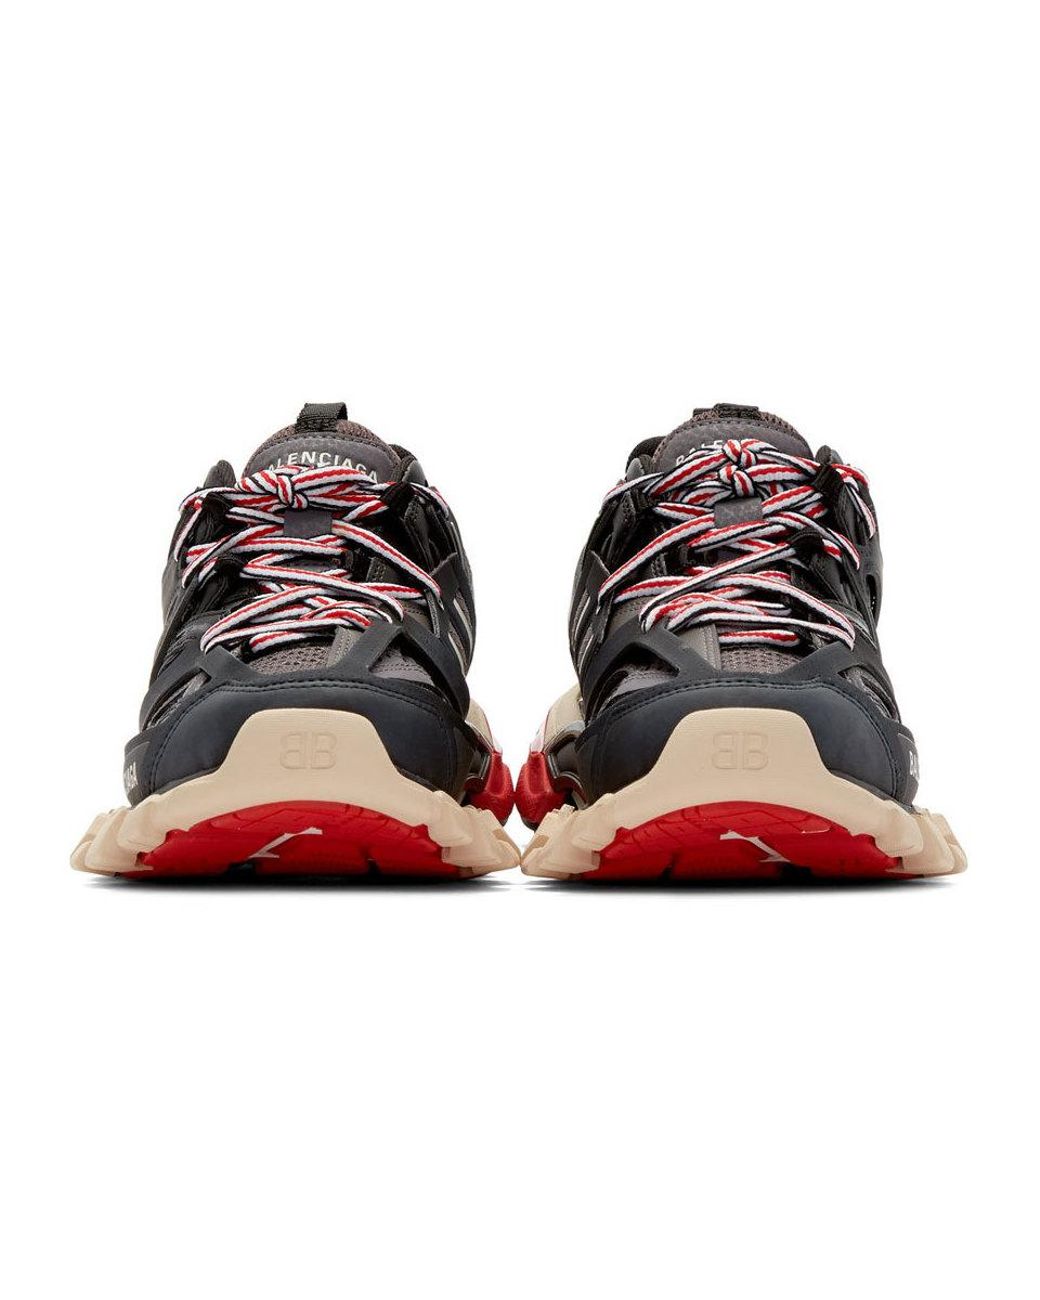 Balenciaga 'Track' Sneakers - Red - ShopStyle